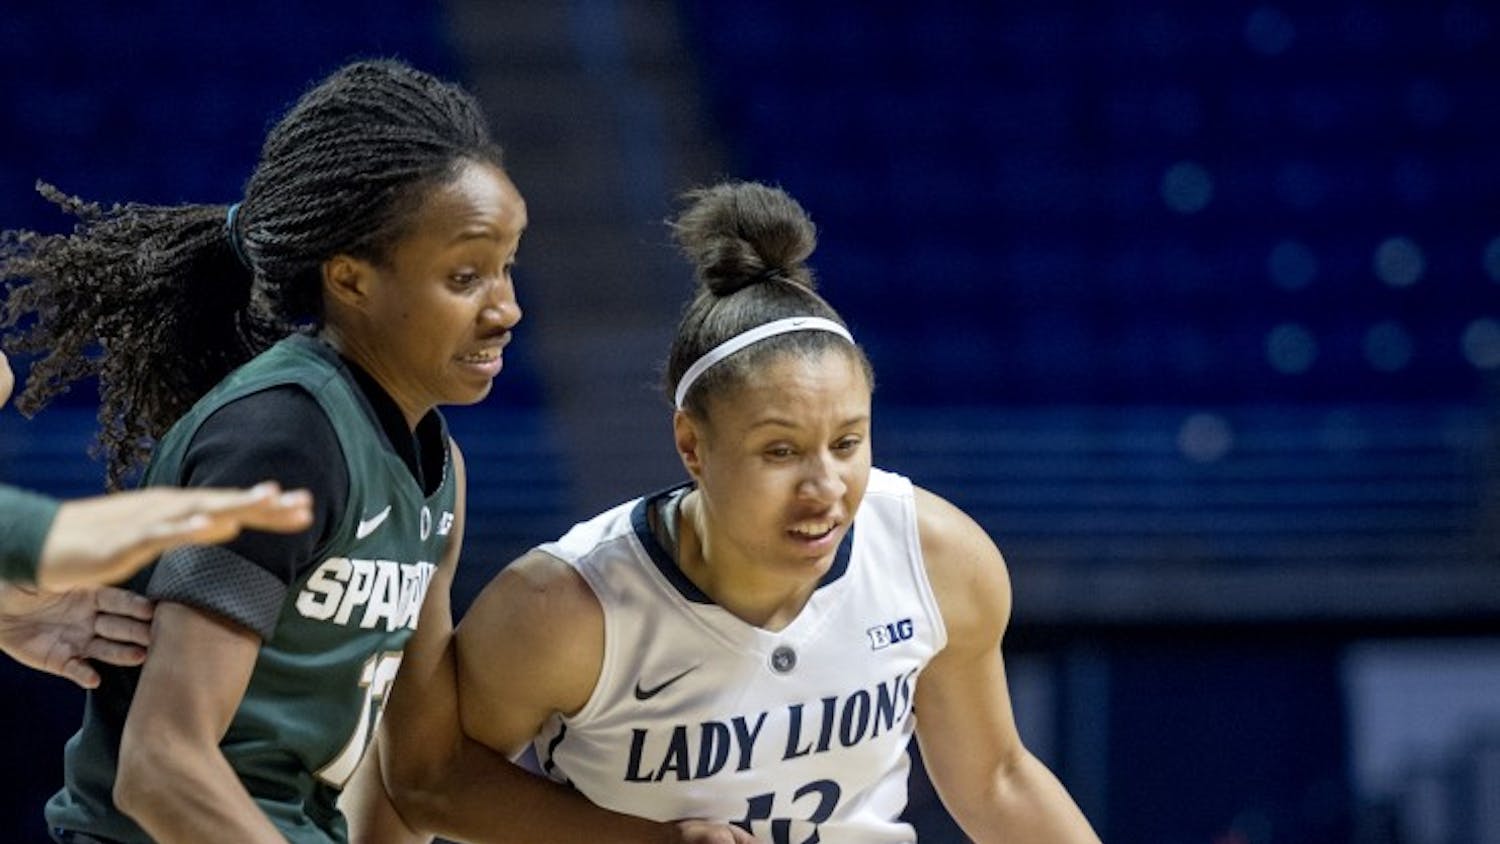 Michigan State's Morgan Green, left, keeps tabs on Penn State's Lindsey Spann on Thursday, Jan. 7, 2016, at the Bryce Jordan Center in University Park, Pa. Michigan State won, 71-55. (Abby Drey/Centre Daily Times/TNS)